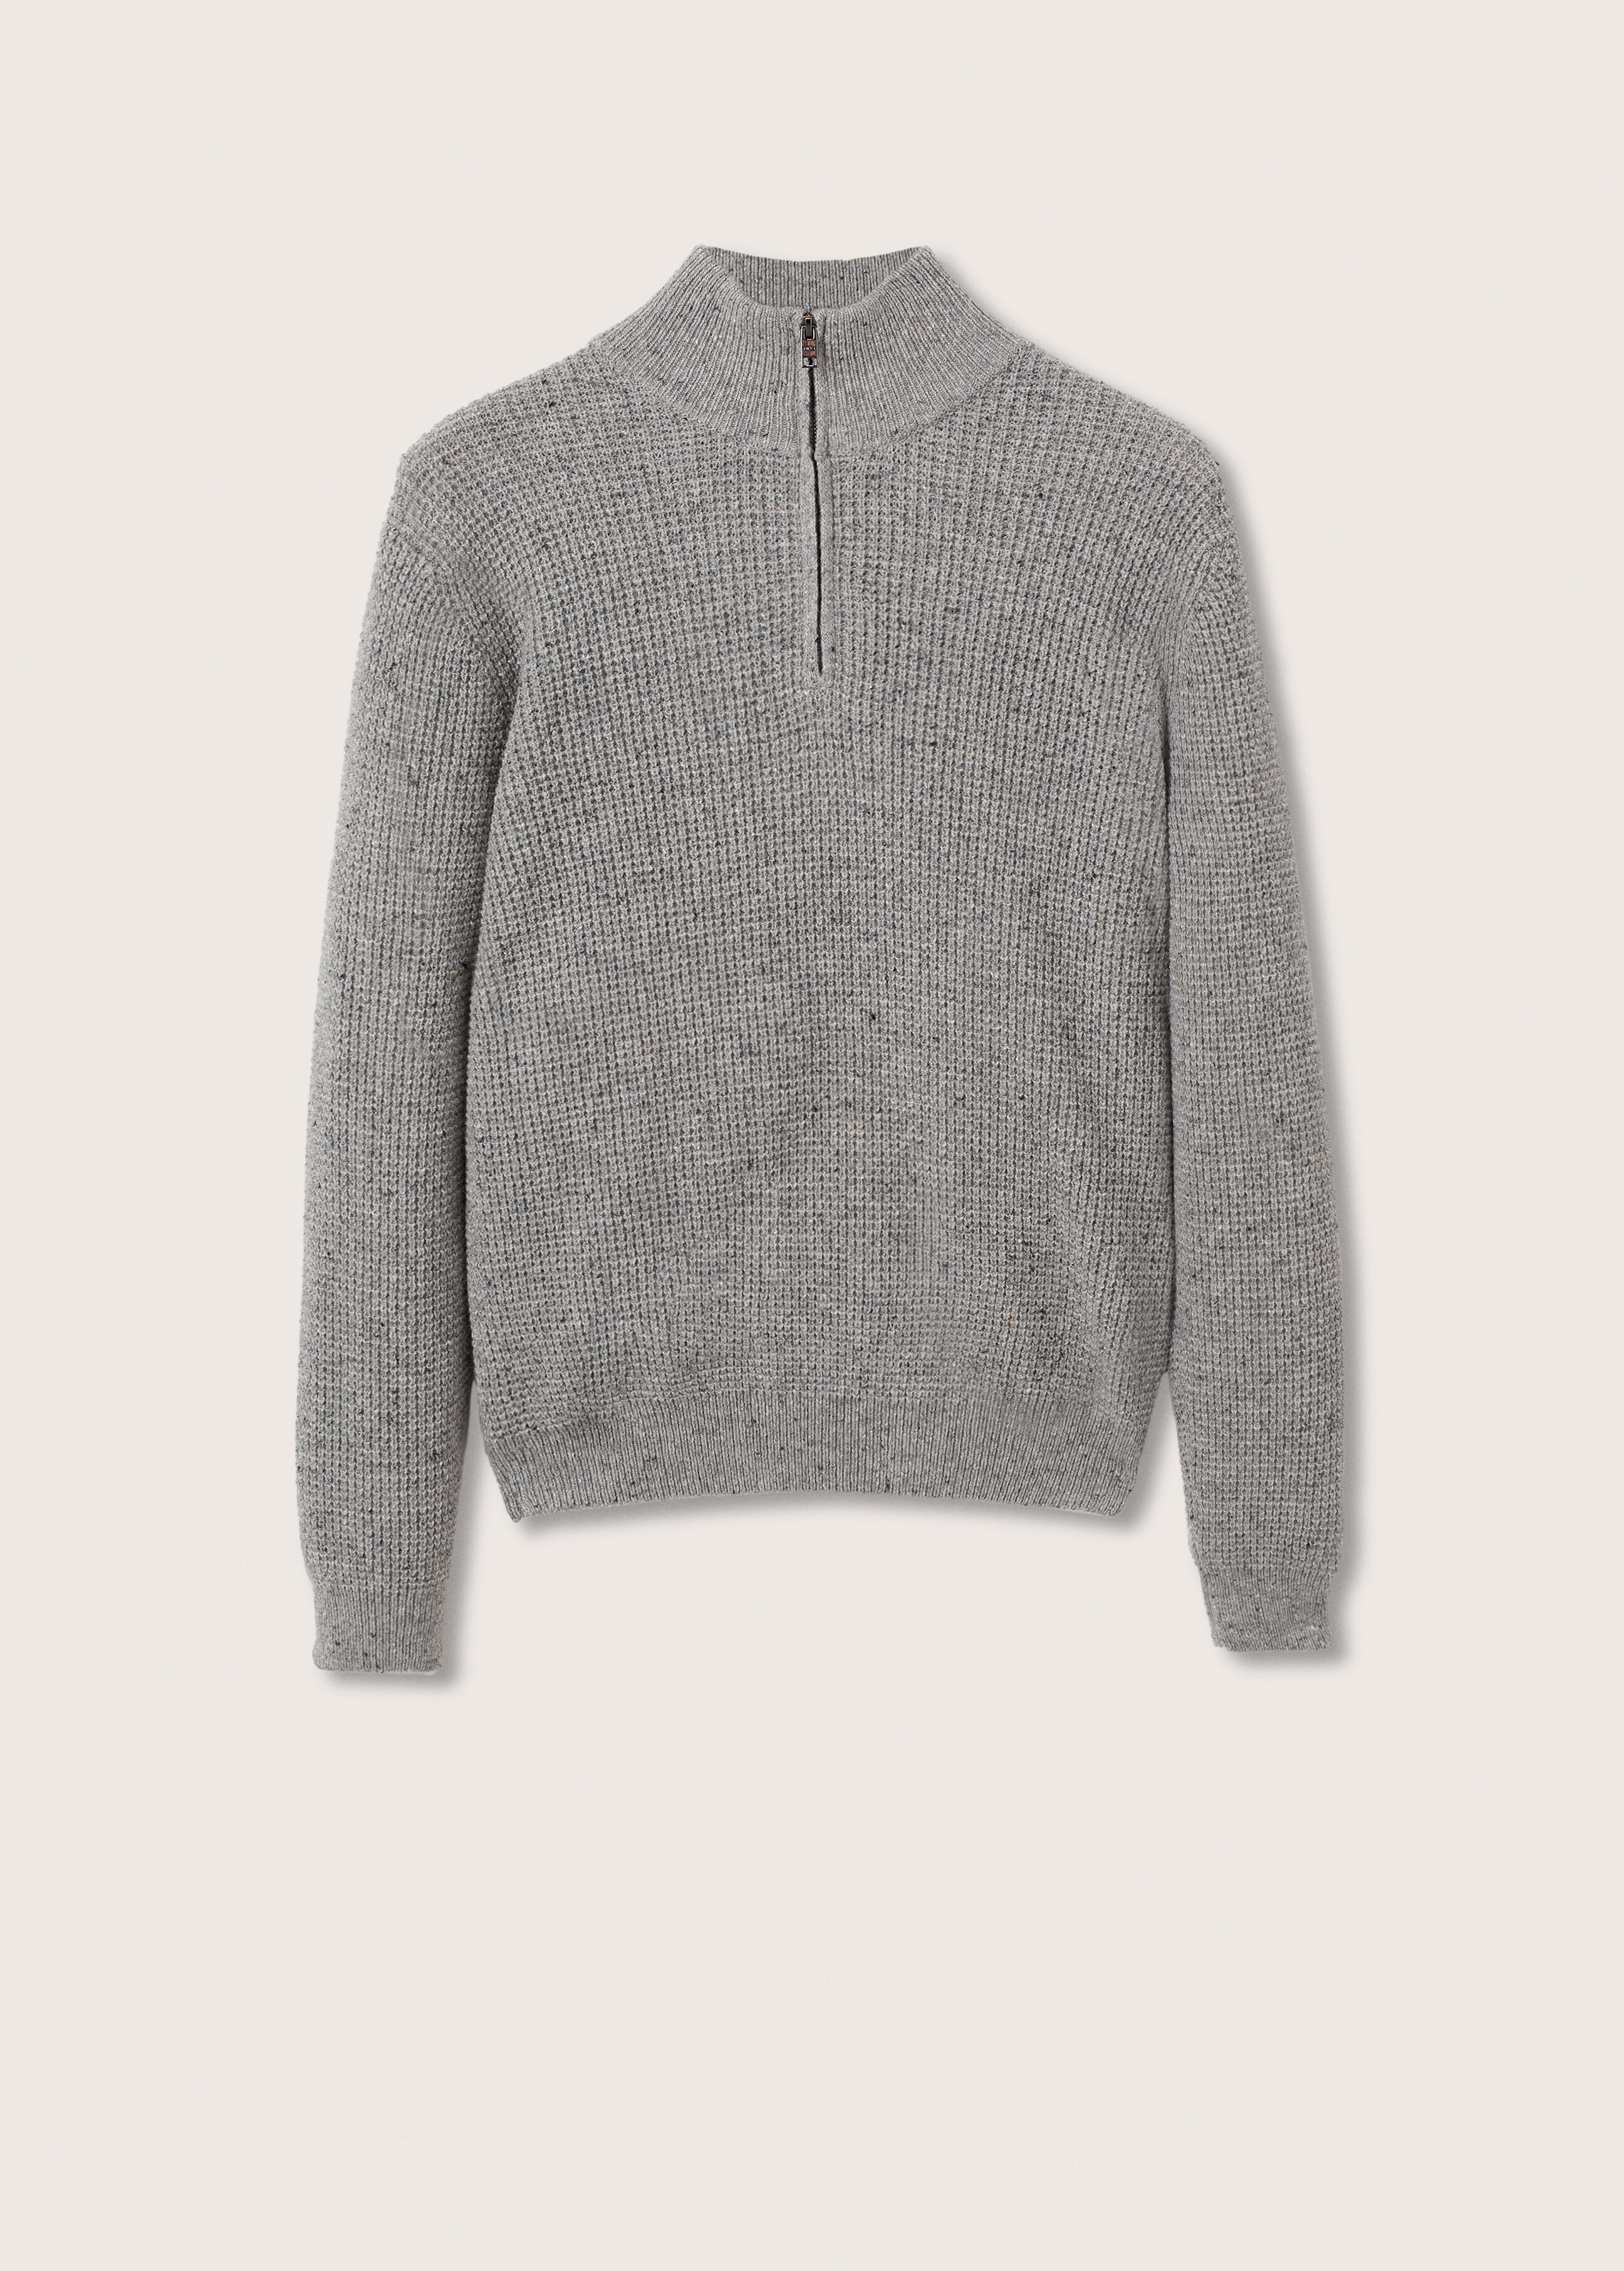 Wool zip neck jumper - Article without model